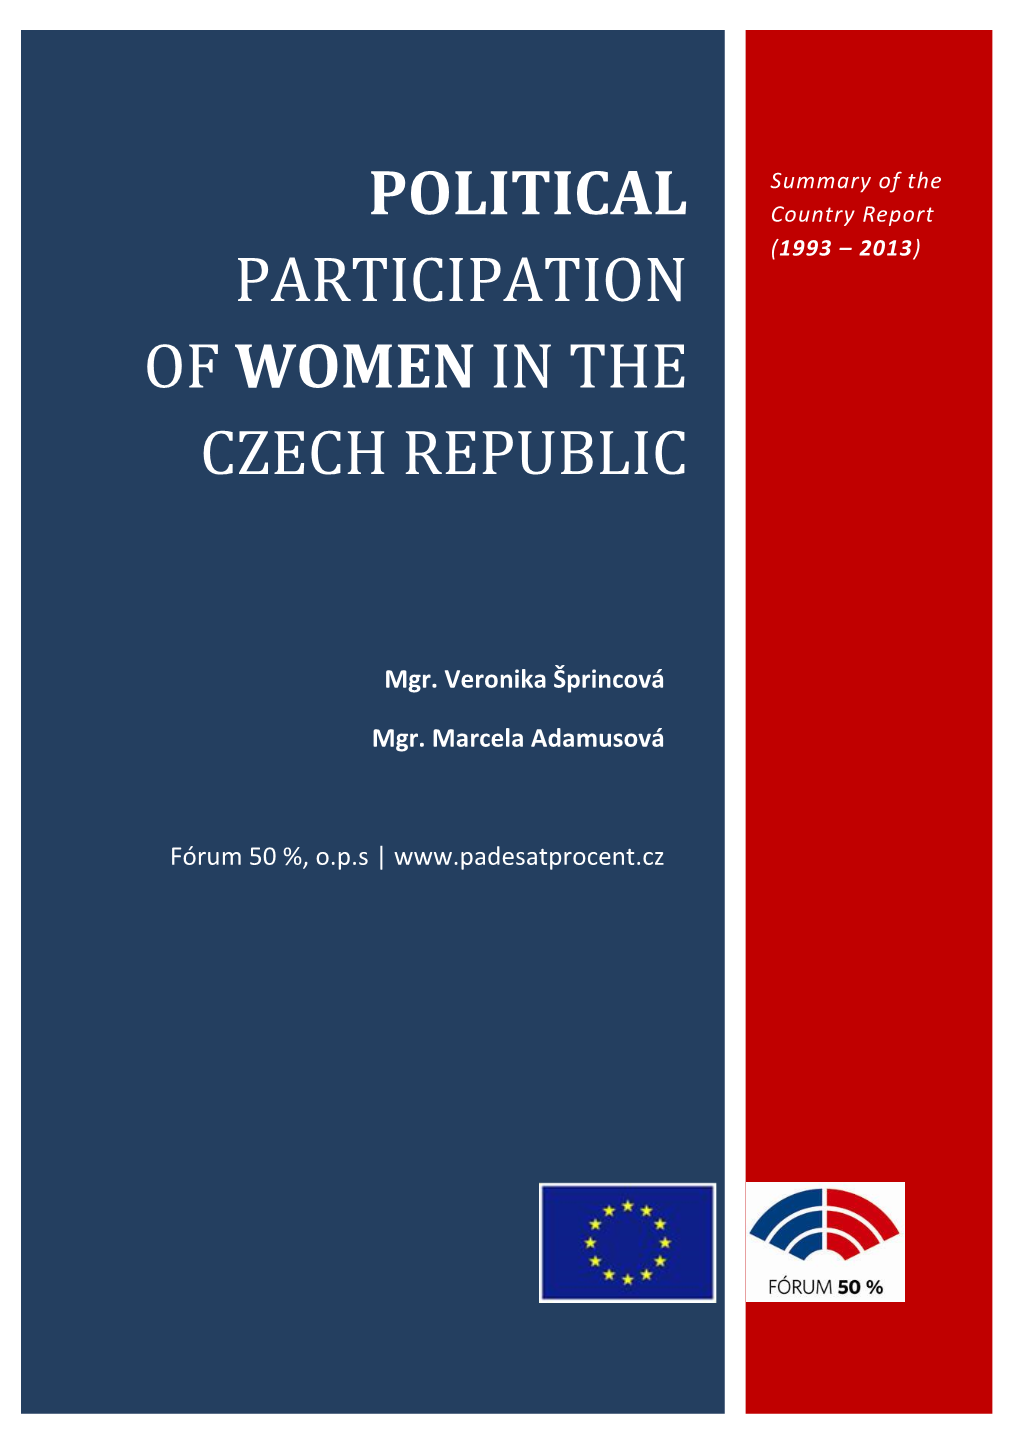 Political Participation of Women in the Czech Republic Summary of the Country Report